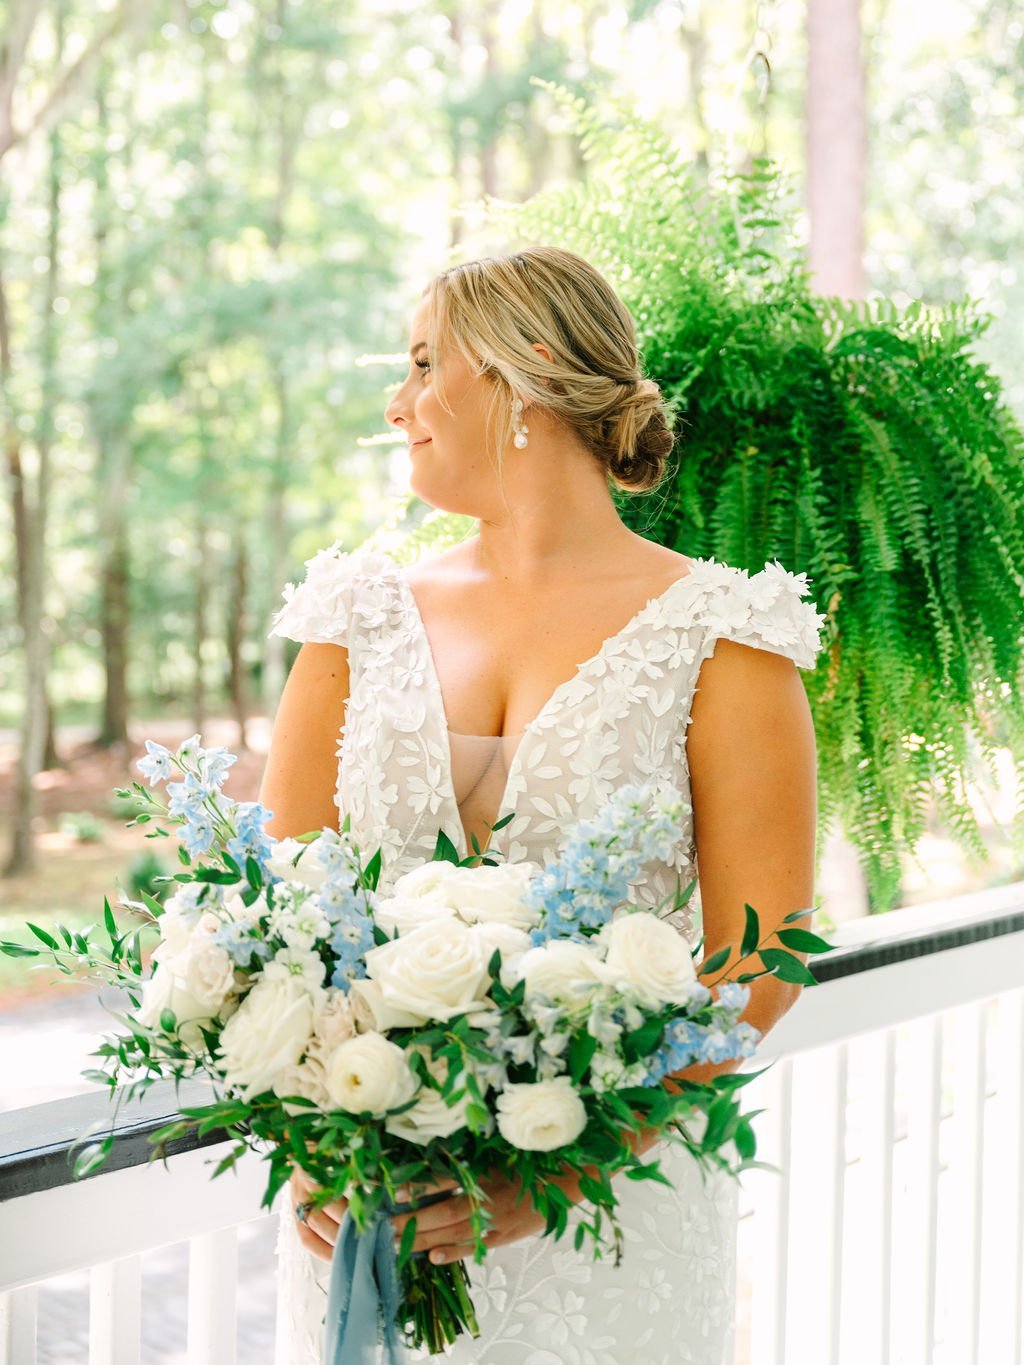 ashlyn-and-conors-chic-southern-summer-wedding-at-the-mackey-house-in-savannah-ga-featuring-bright-airy-fun-florals-by-savannah-florist-ivory-and-beau-1.jpg